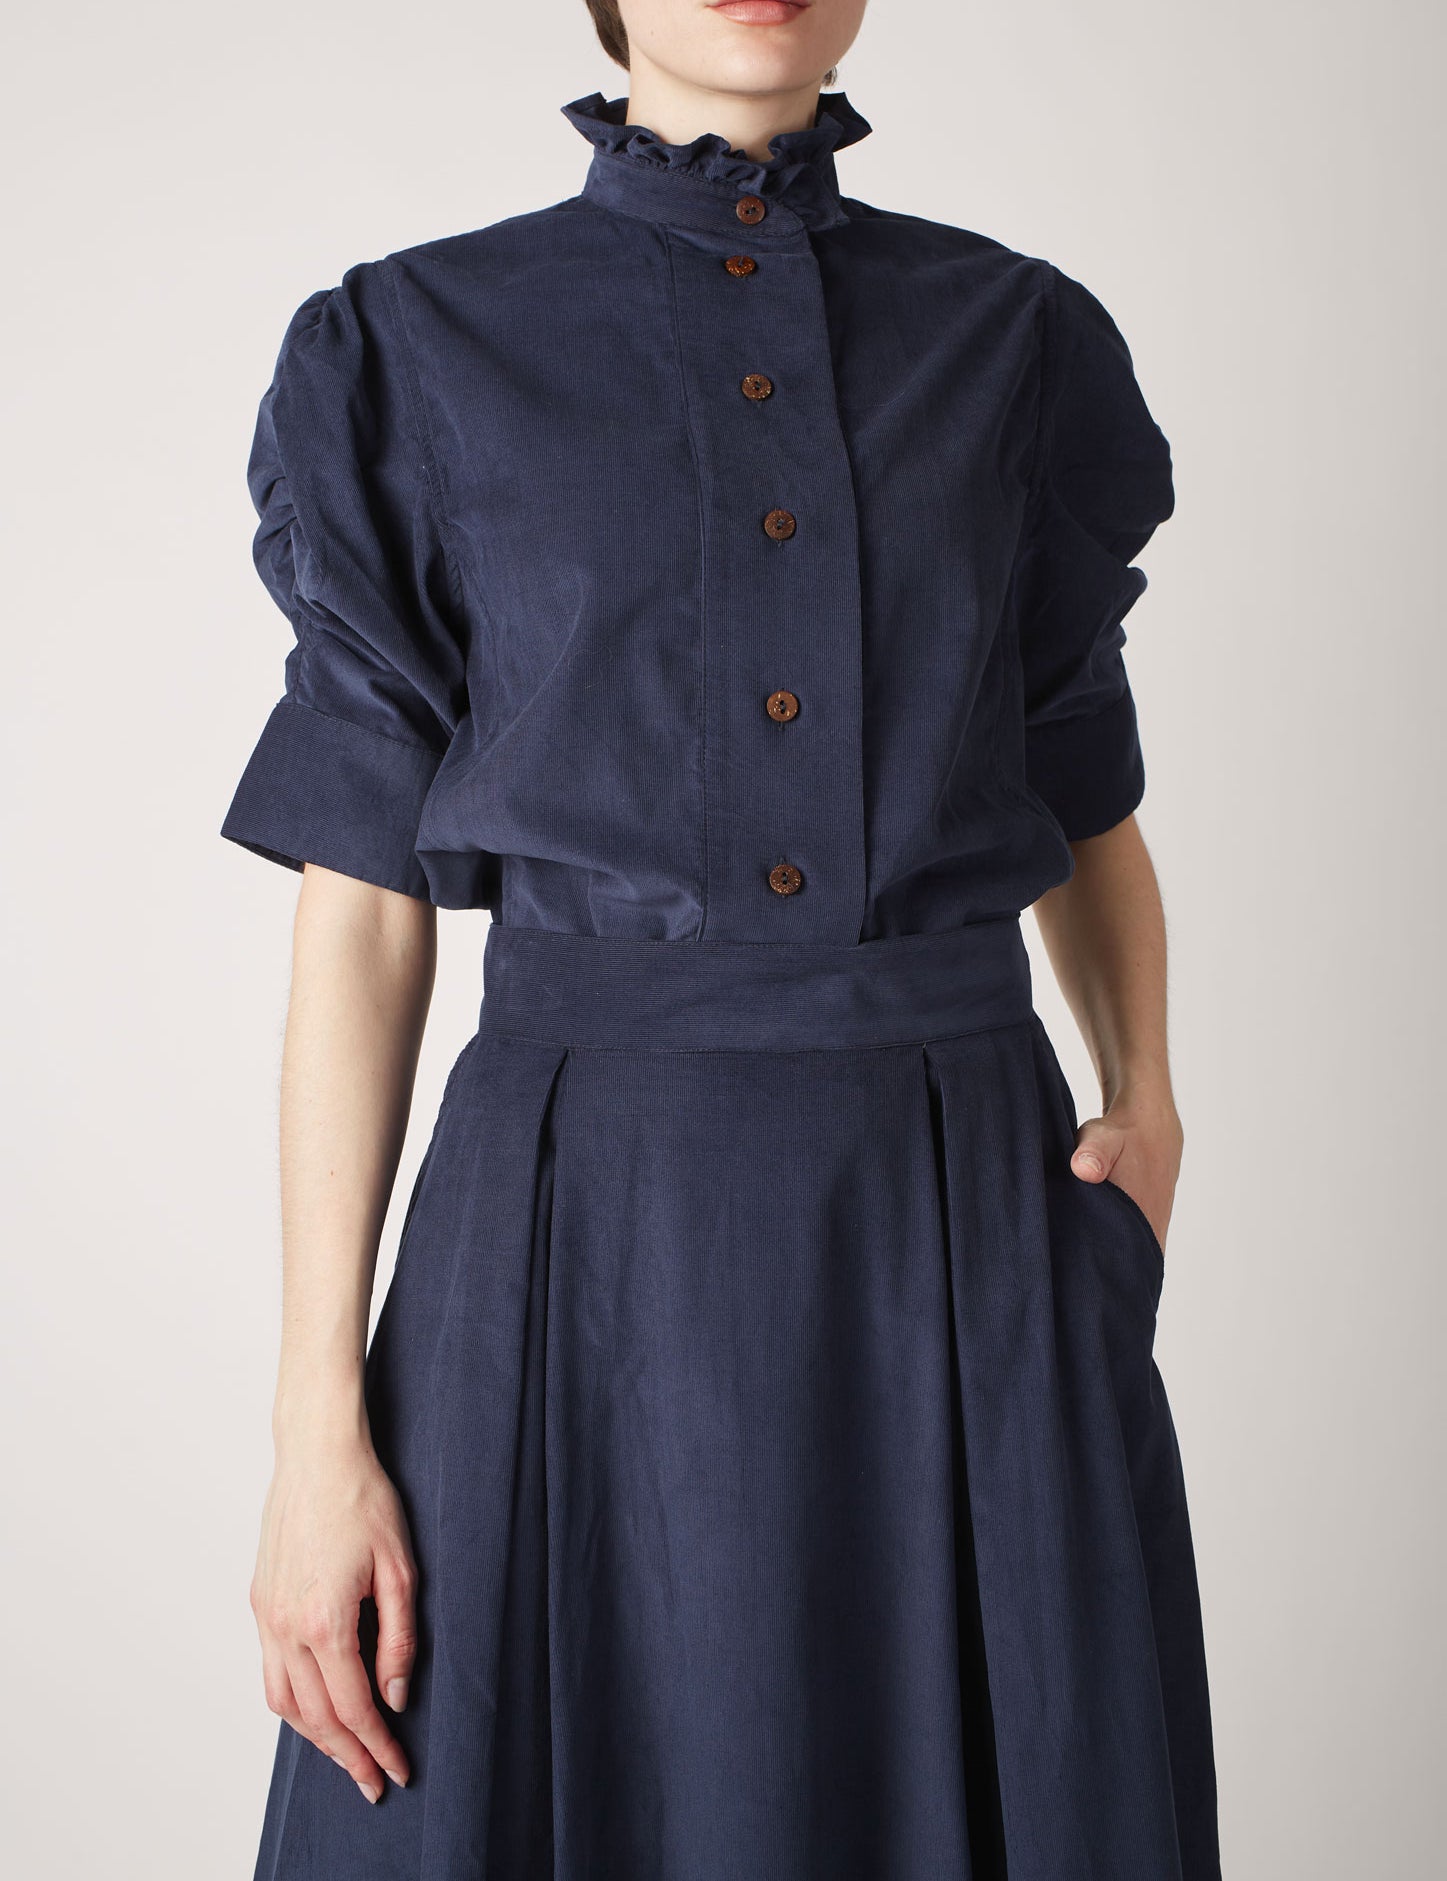 Front view of Vita Prussian Blue Corduroy Shirt  with Wynona Skirt by Thierry Colson